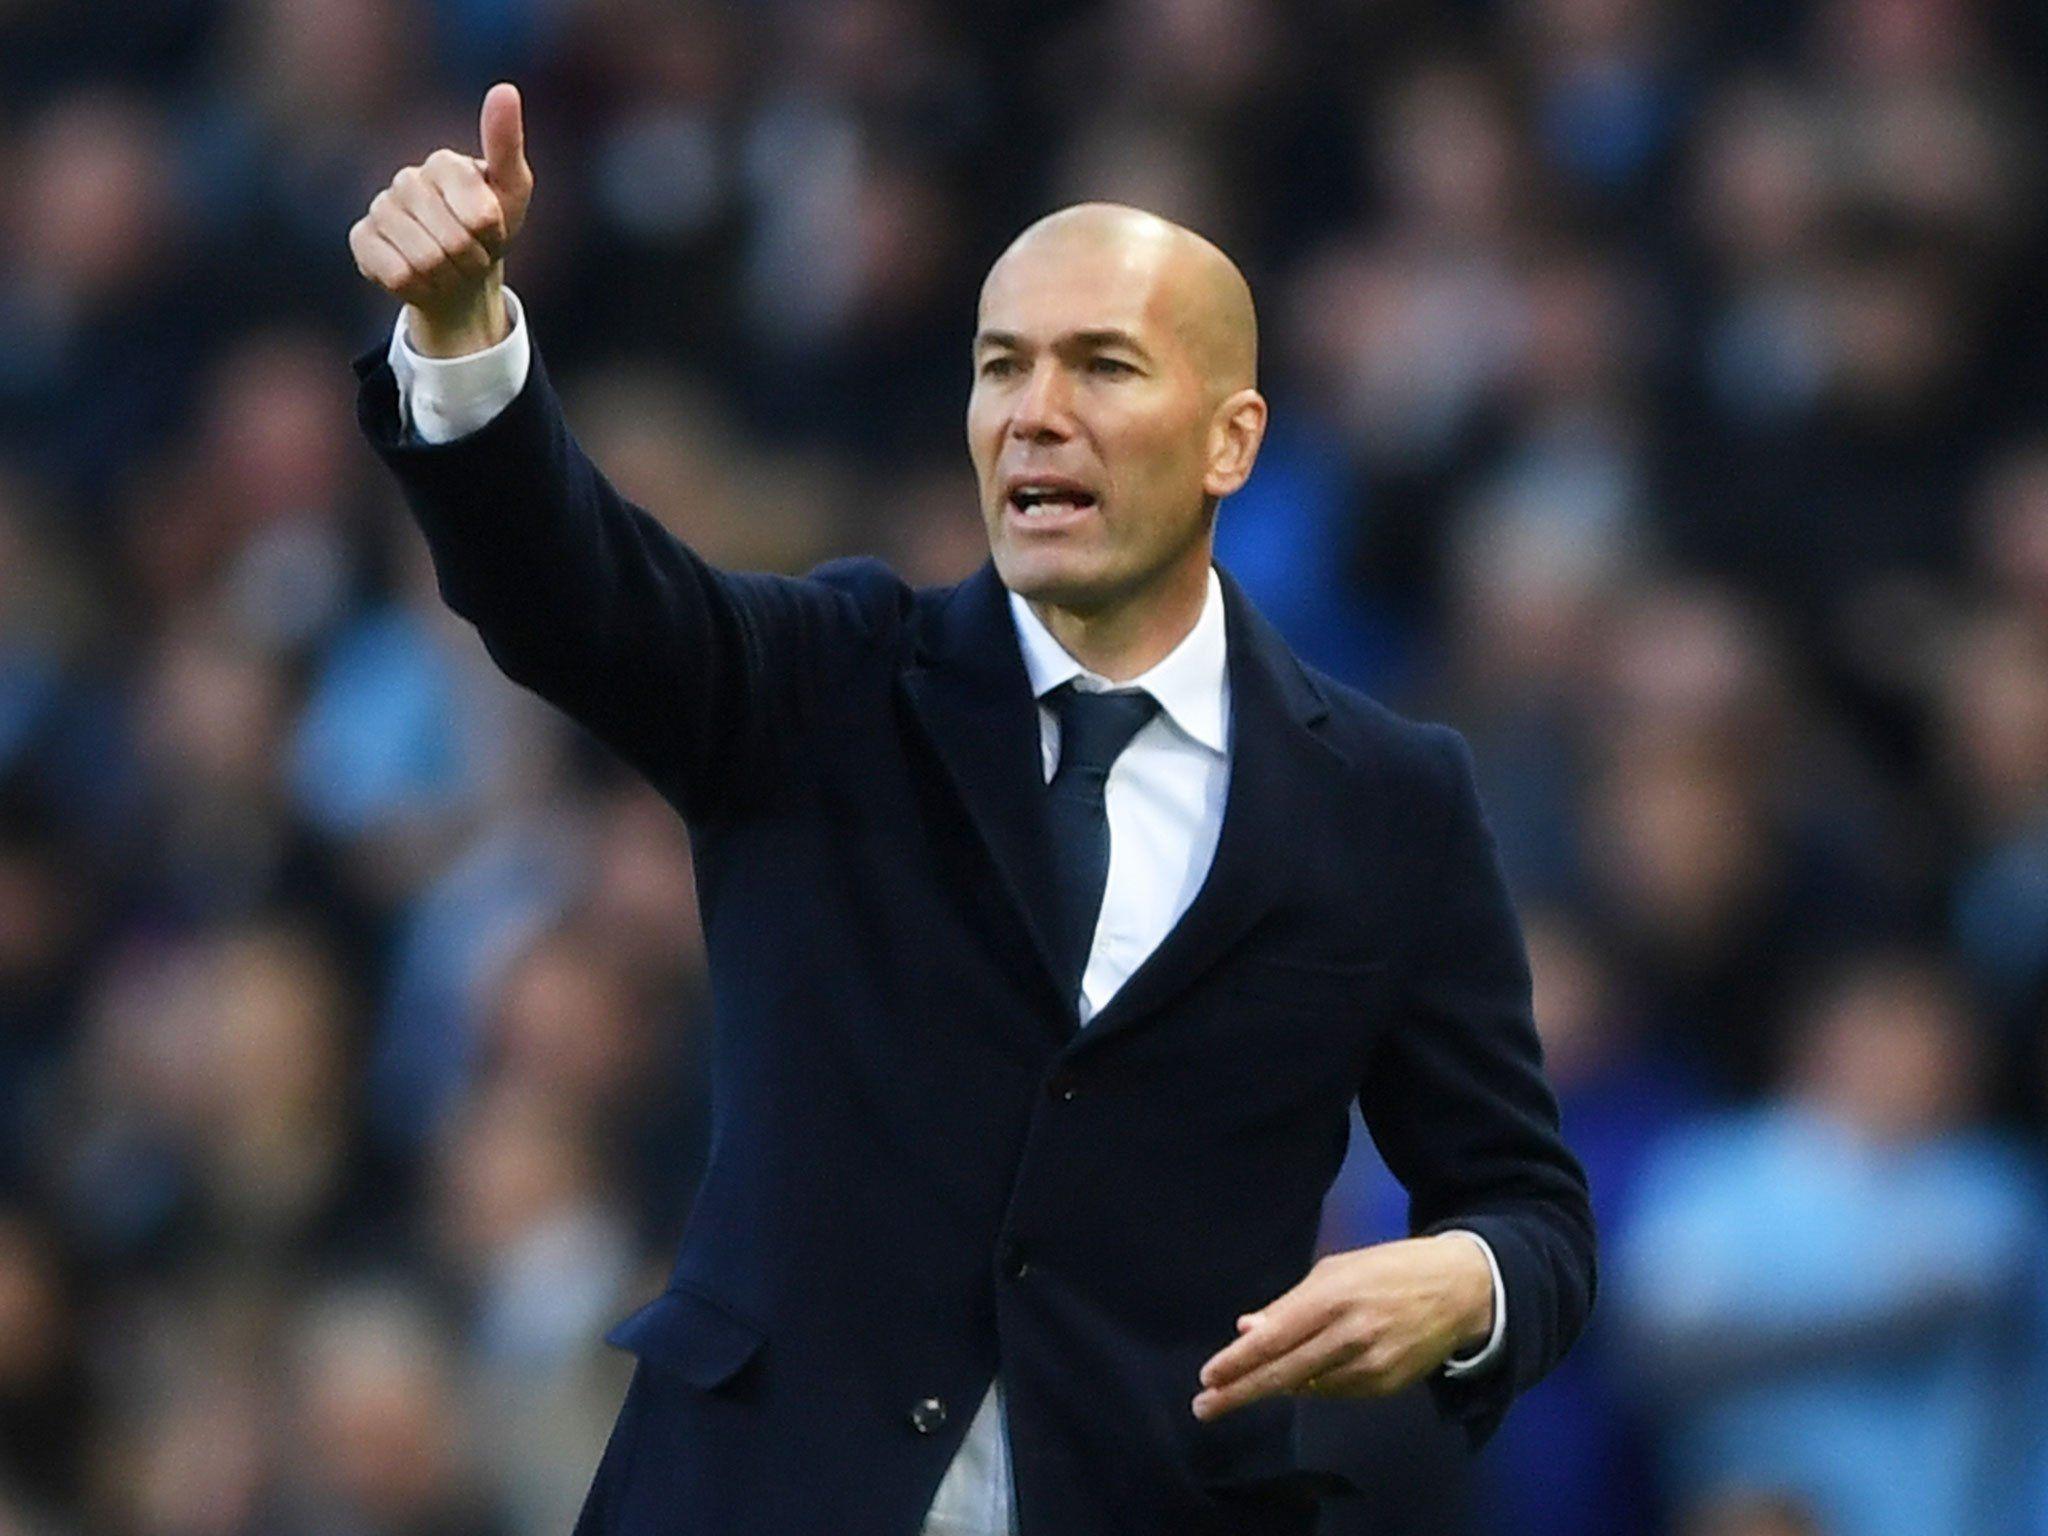 Zinedine Zidane: Did the Real Madrid manager rip his trousers again